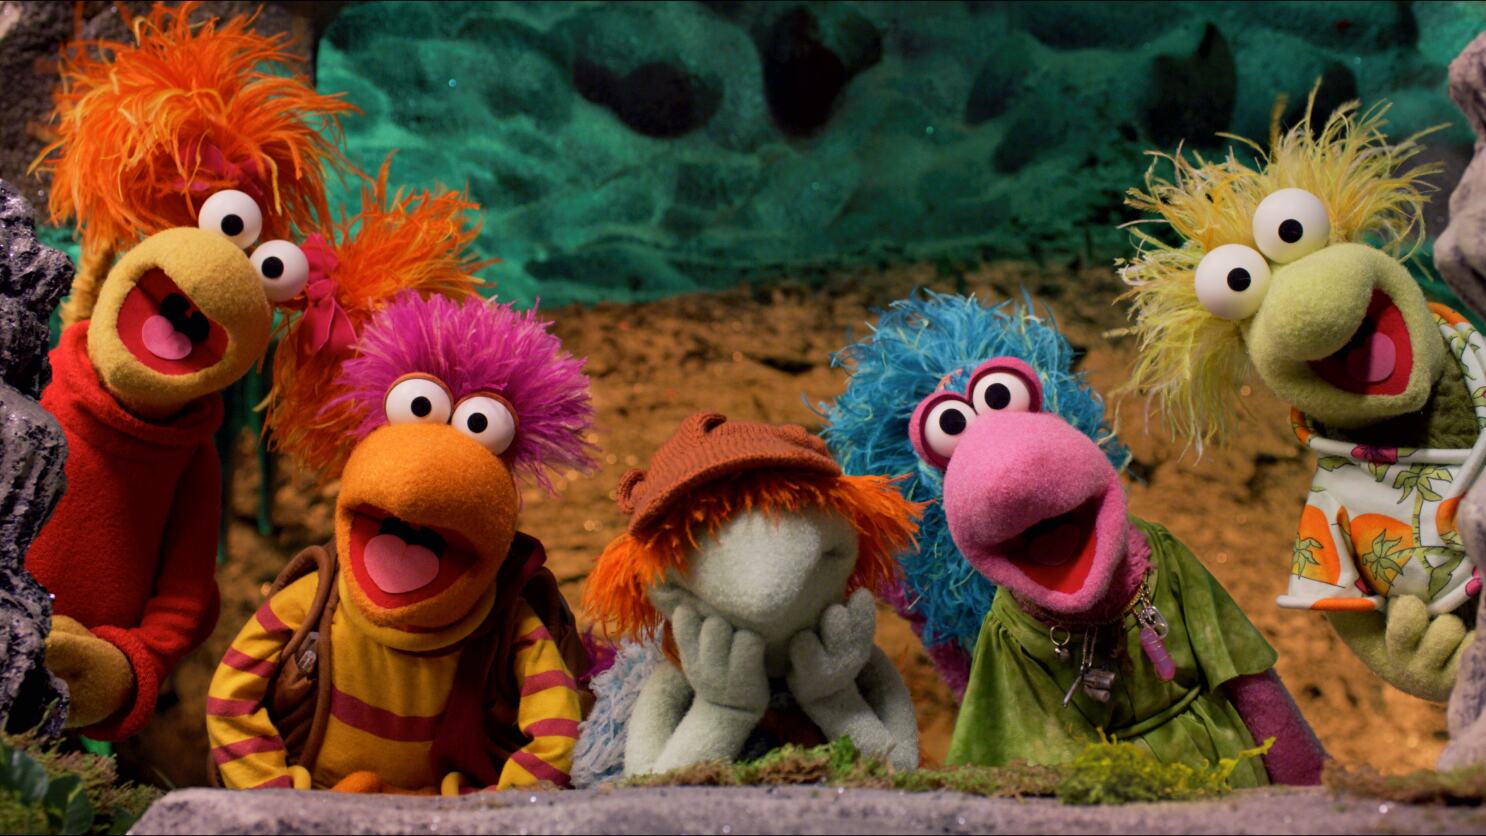 Fraggle Rock: Back to the Rock Season 2 Episode 1 Release Date